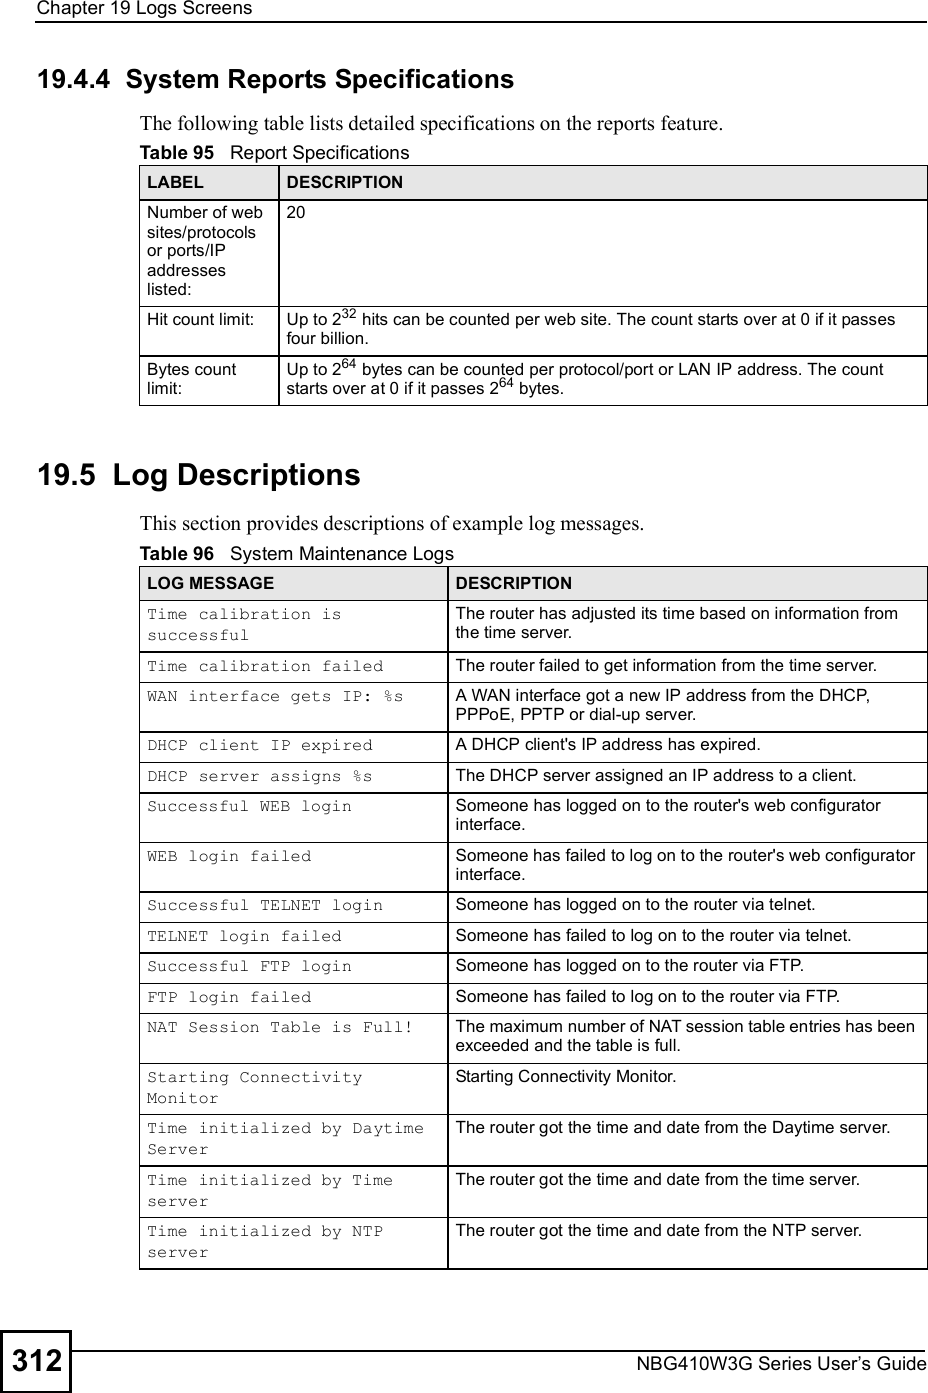 Chapter 19Logs ScreensNBG410W3G Series User s Guide31219.4.4  System Reports SpecificationsThe following table lists detailed specifications on the reports feature.19.5  Log DescriptionsThis section provides descriptions of example log messages. Table 95   Report SpecificationsLABEL DESCRIPTIONNumber of web sites/protocols or ports/IP addresses listed:20Hit count limit: Up to 232 hits can be counted per web site. The count starts over at 0 if it passes four billion.Bytes count limit:Up to 264 bytes can be counted per protocol/port or LAN IP address. The count starts over at 0 if it passes 264 bytes.Table 96   System Maintenance LogsLOG MESSAGE DESCRIPTIONTime calibration is successfulThe router has adjusted its time based on information from the time server.Time calibration failed The router failed to get information from the time server.WAN interface gets IP: %s A WAN interface got a new IP address from the DHCP, PPPoE, PPTP or dial-up server.DHCP client IP expired A DHCP client&apos;s IP address has expired.DHCP server assigns %s The DHCP server assigned an IP address to a client.Successful WEB login Someone has logged on to the router&apos;s web configurator interface.WEB login failed Someone has failed to log on to the router&apos;s web configurator interface.Successful TELNET login Someone has logged on to the router via telnet.TELNET login failed Someone has failed to log on to the router via telnet.Successful FTP login Someone has logged on to the router via FTP.FTP login failed Someone has failed to log on to the router via FTP.NAT Session Table is Full! The maximum number of NAT session table entries has been exceeded and the table is full.Starting Connectivity MonitorStarting Connectivity Monitor.Time initialized by Daytime ServerThe router got the time and date from the Daytime server.Time initialized by Time serverThe router got the time and date from the time server.Time initialized by NTP serverThe router got the time and date from the NTP server.